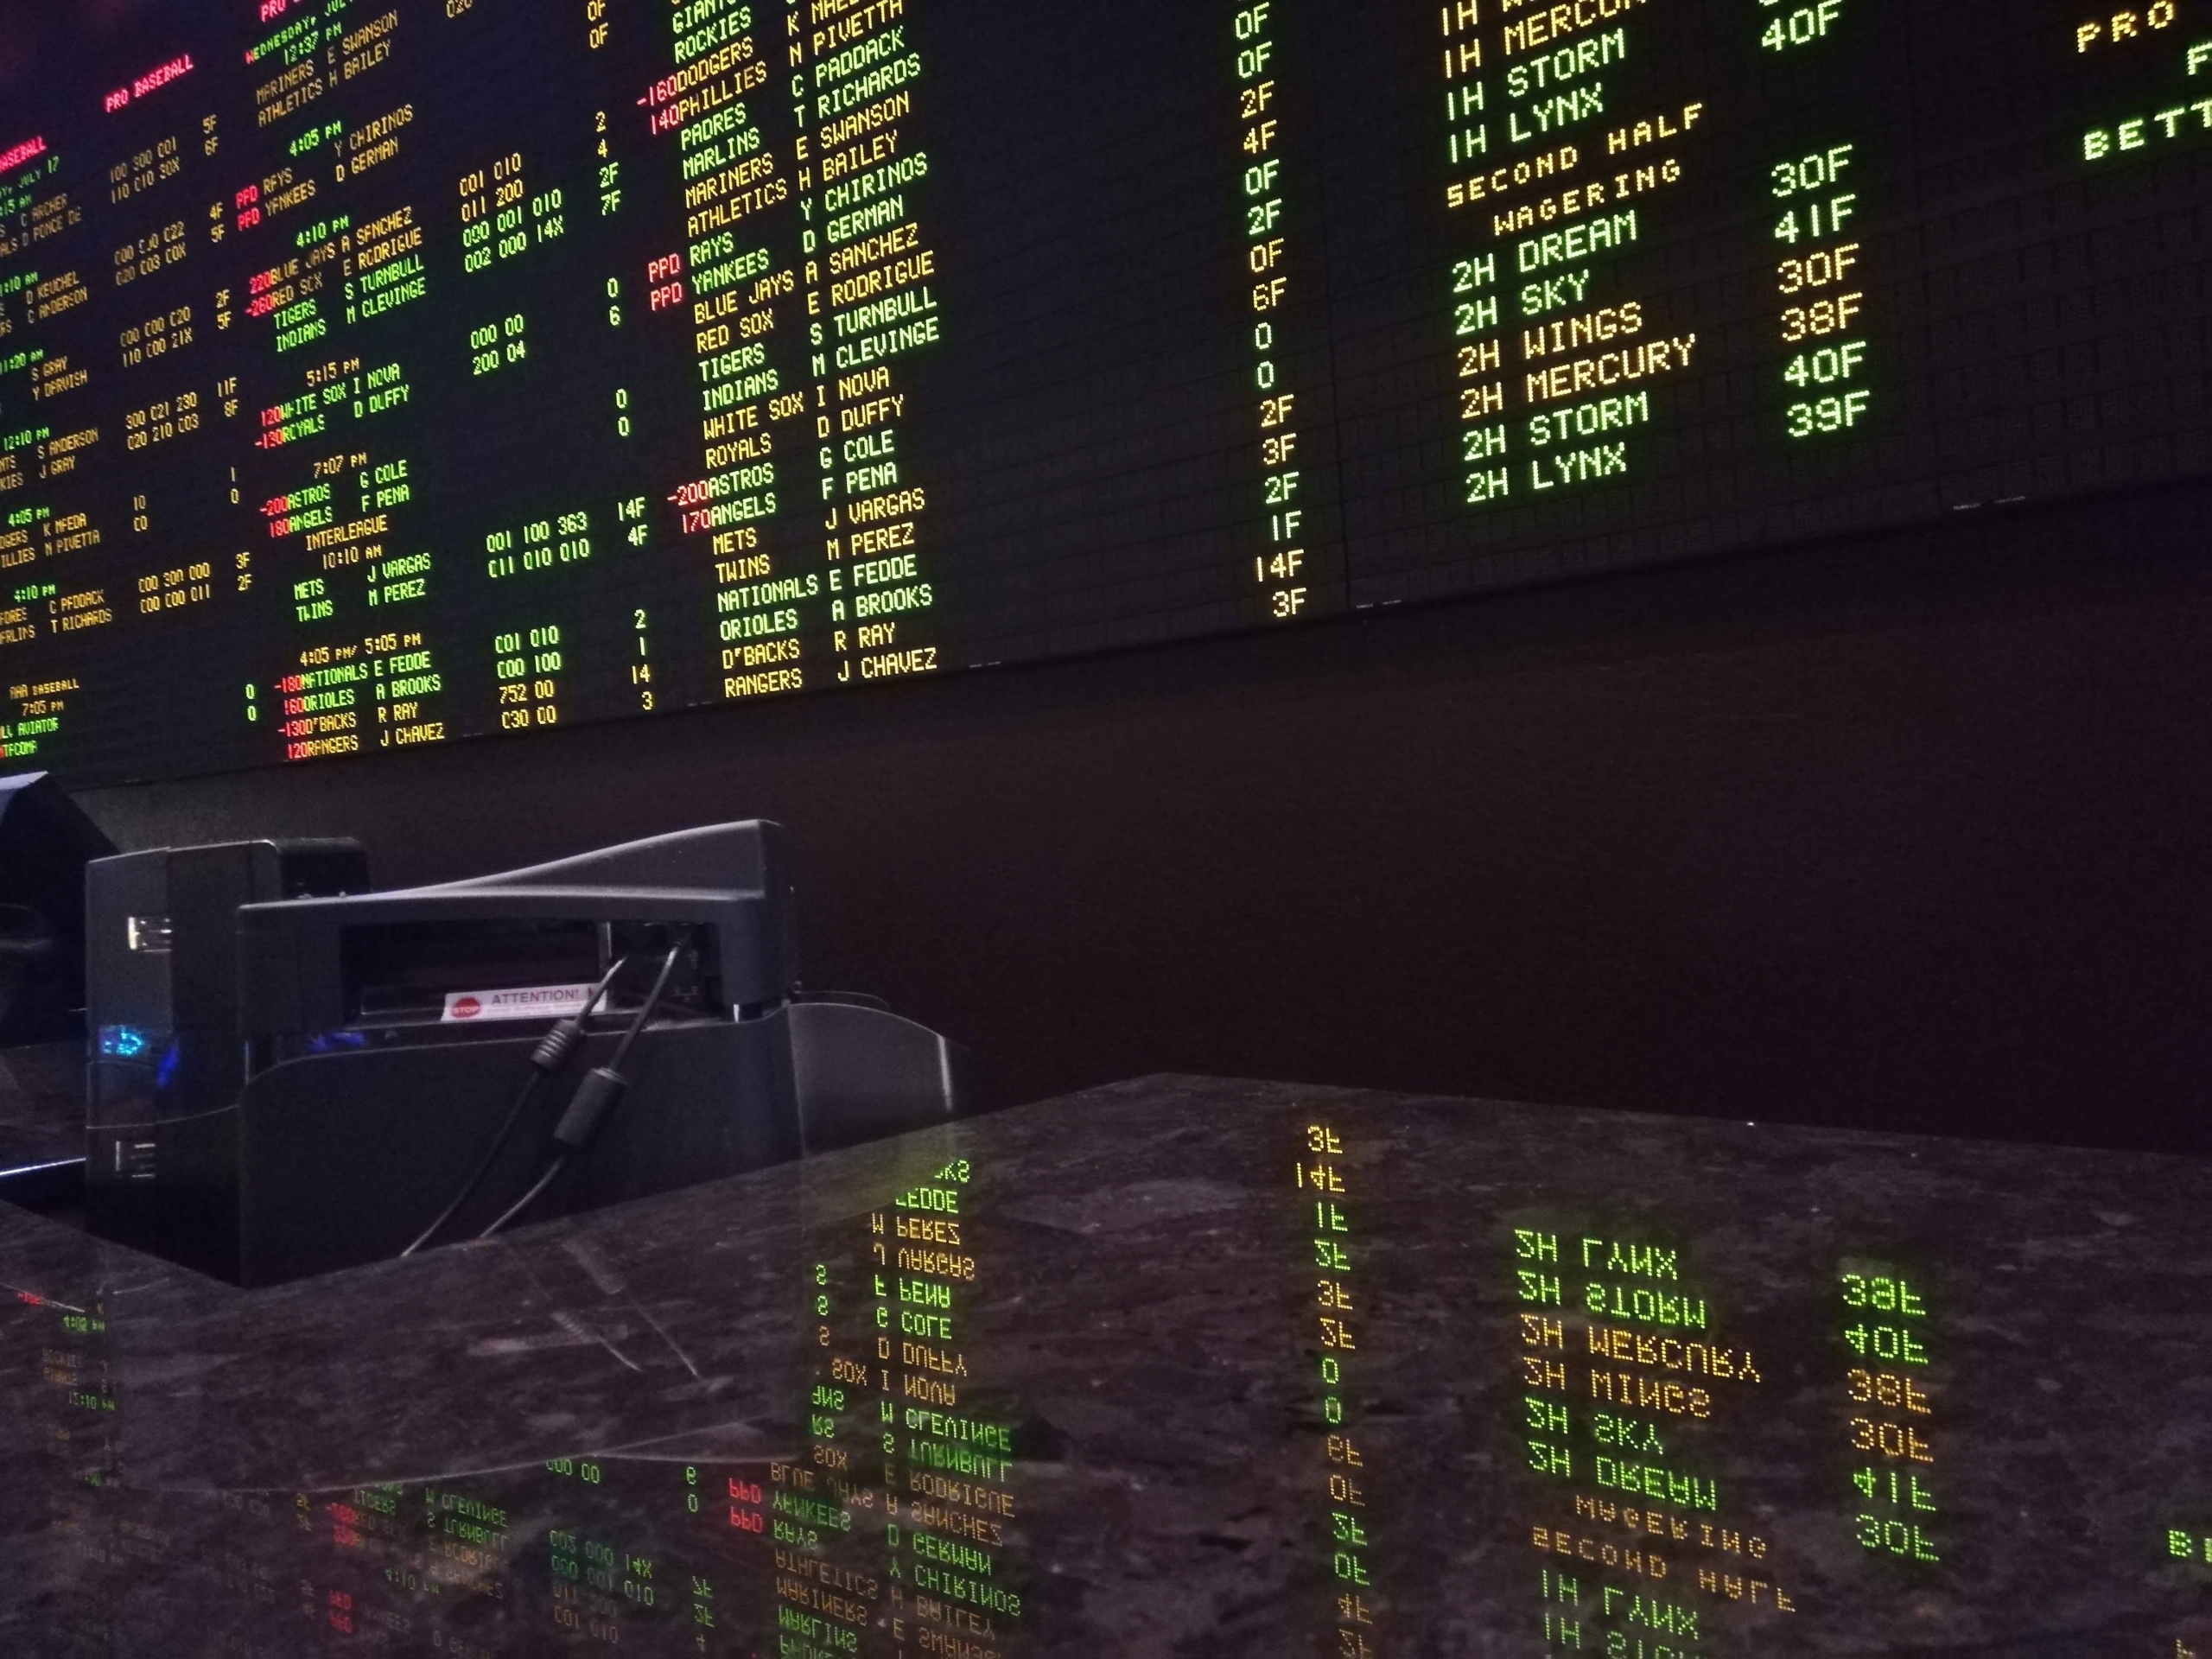 Typical handicapping trends the public uses in NFL and NCAA football